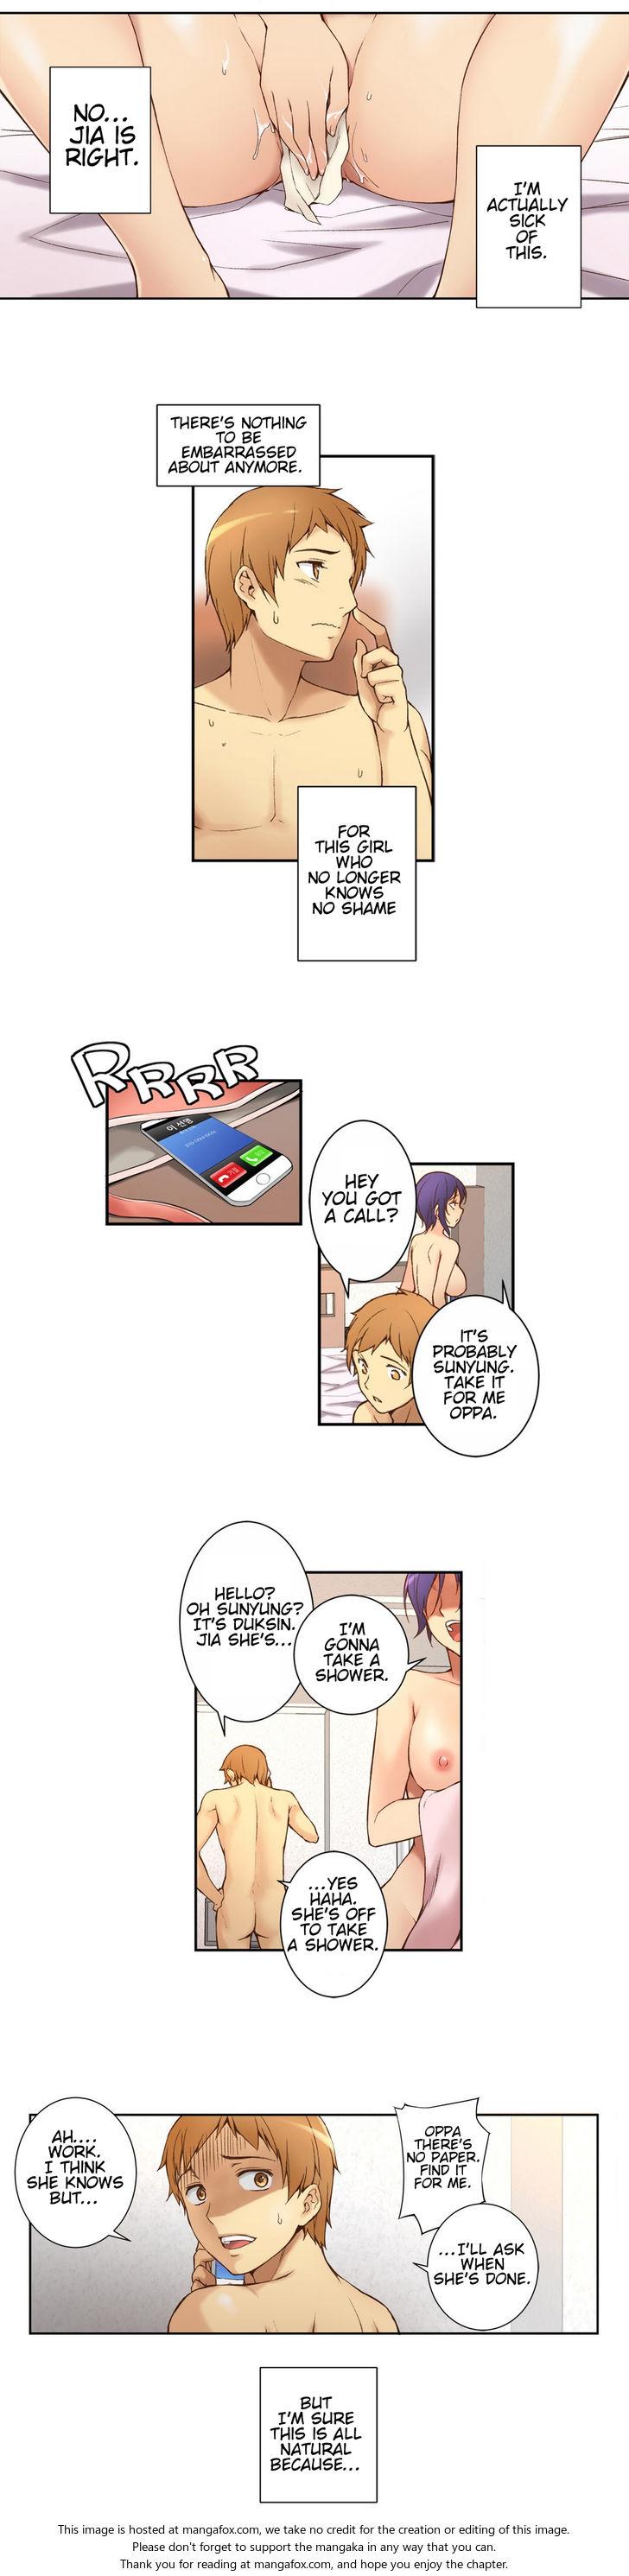 Suckingcock [Donggul Gom] She is Young (English) Part 1/2 Price - Page 8